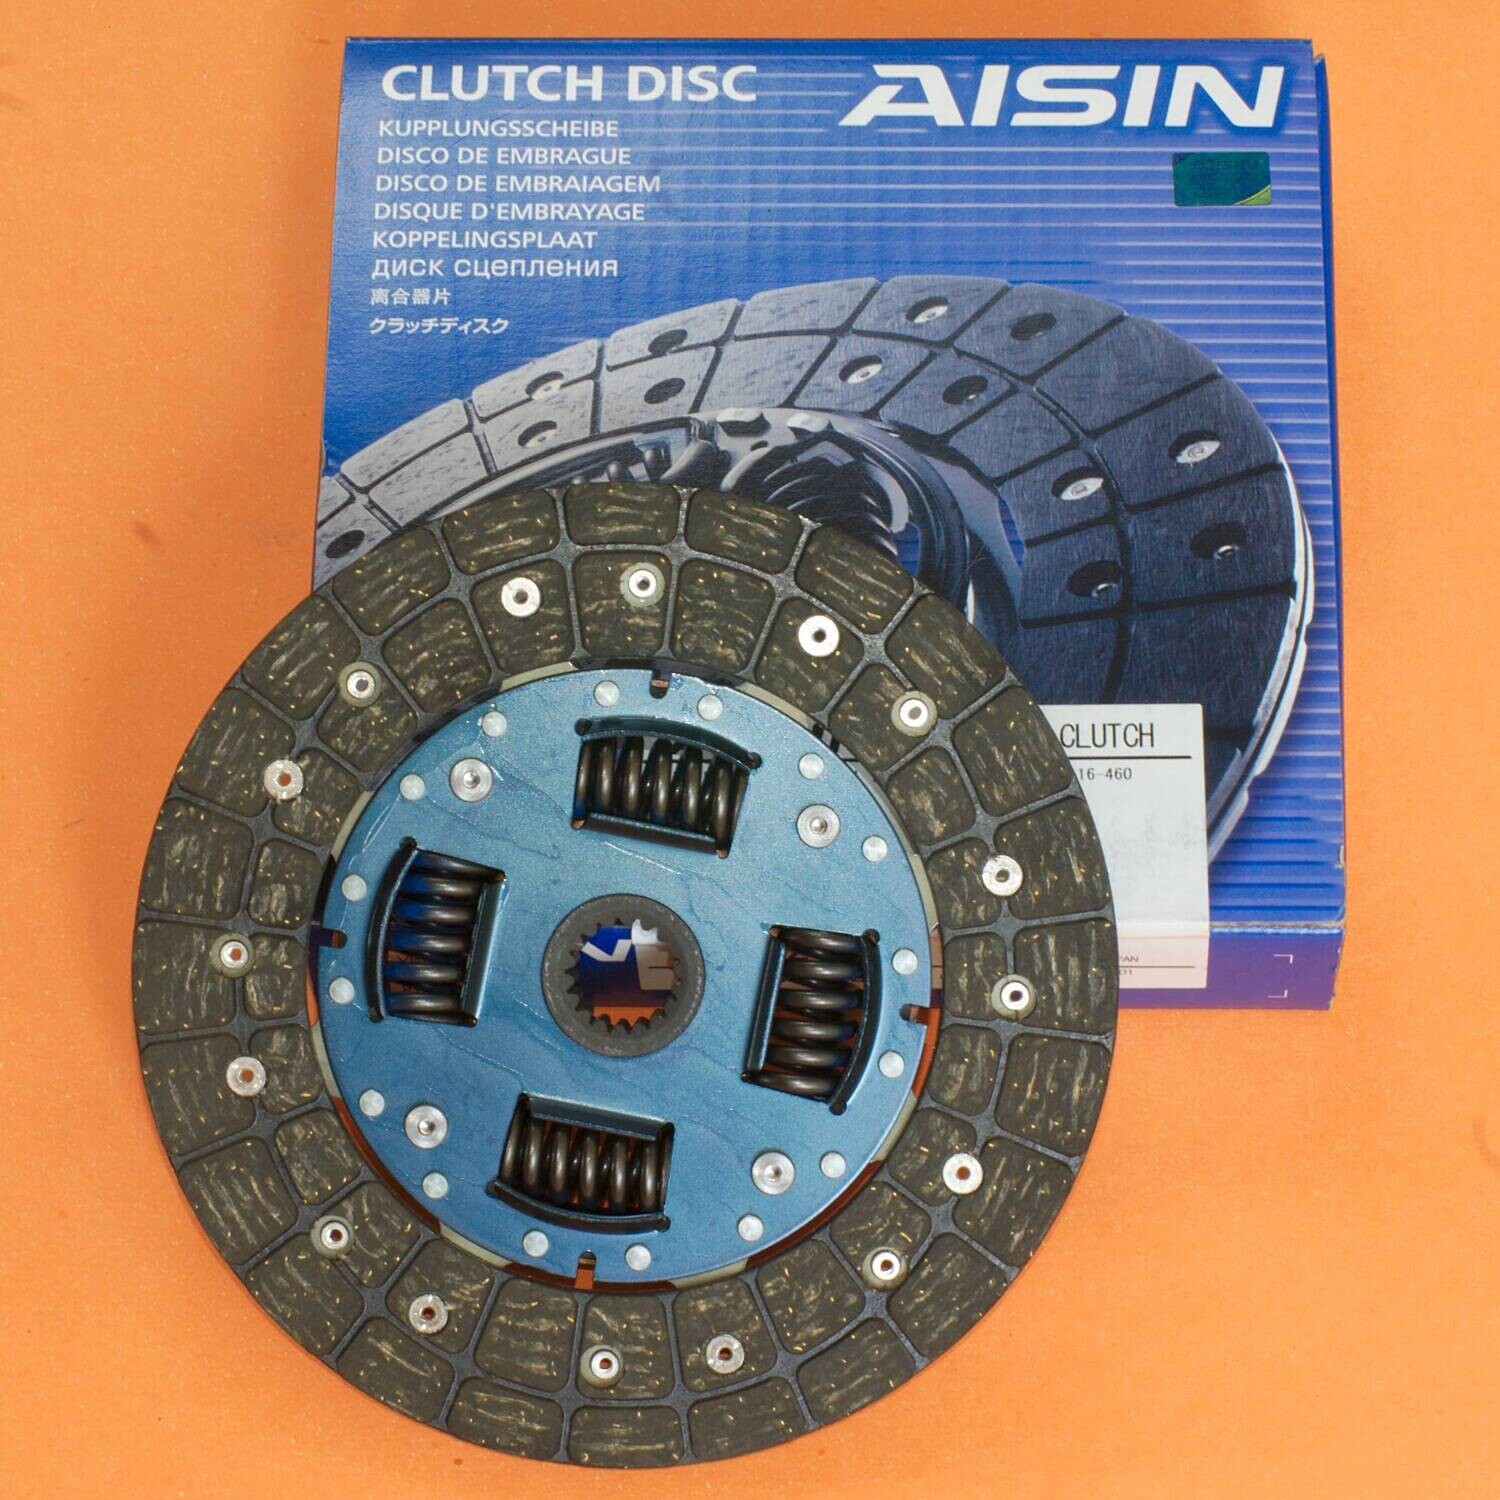 Aisin Clutch Disc Fits Suzuki Carry Every DC51T DD51B DD51T DE51V DF51V Mazda Scrum DJ51B DJ51T DK51B DK51T DL51V DM51V Non-Turbo F6A